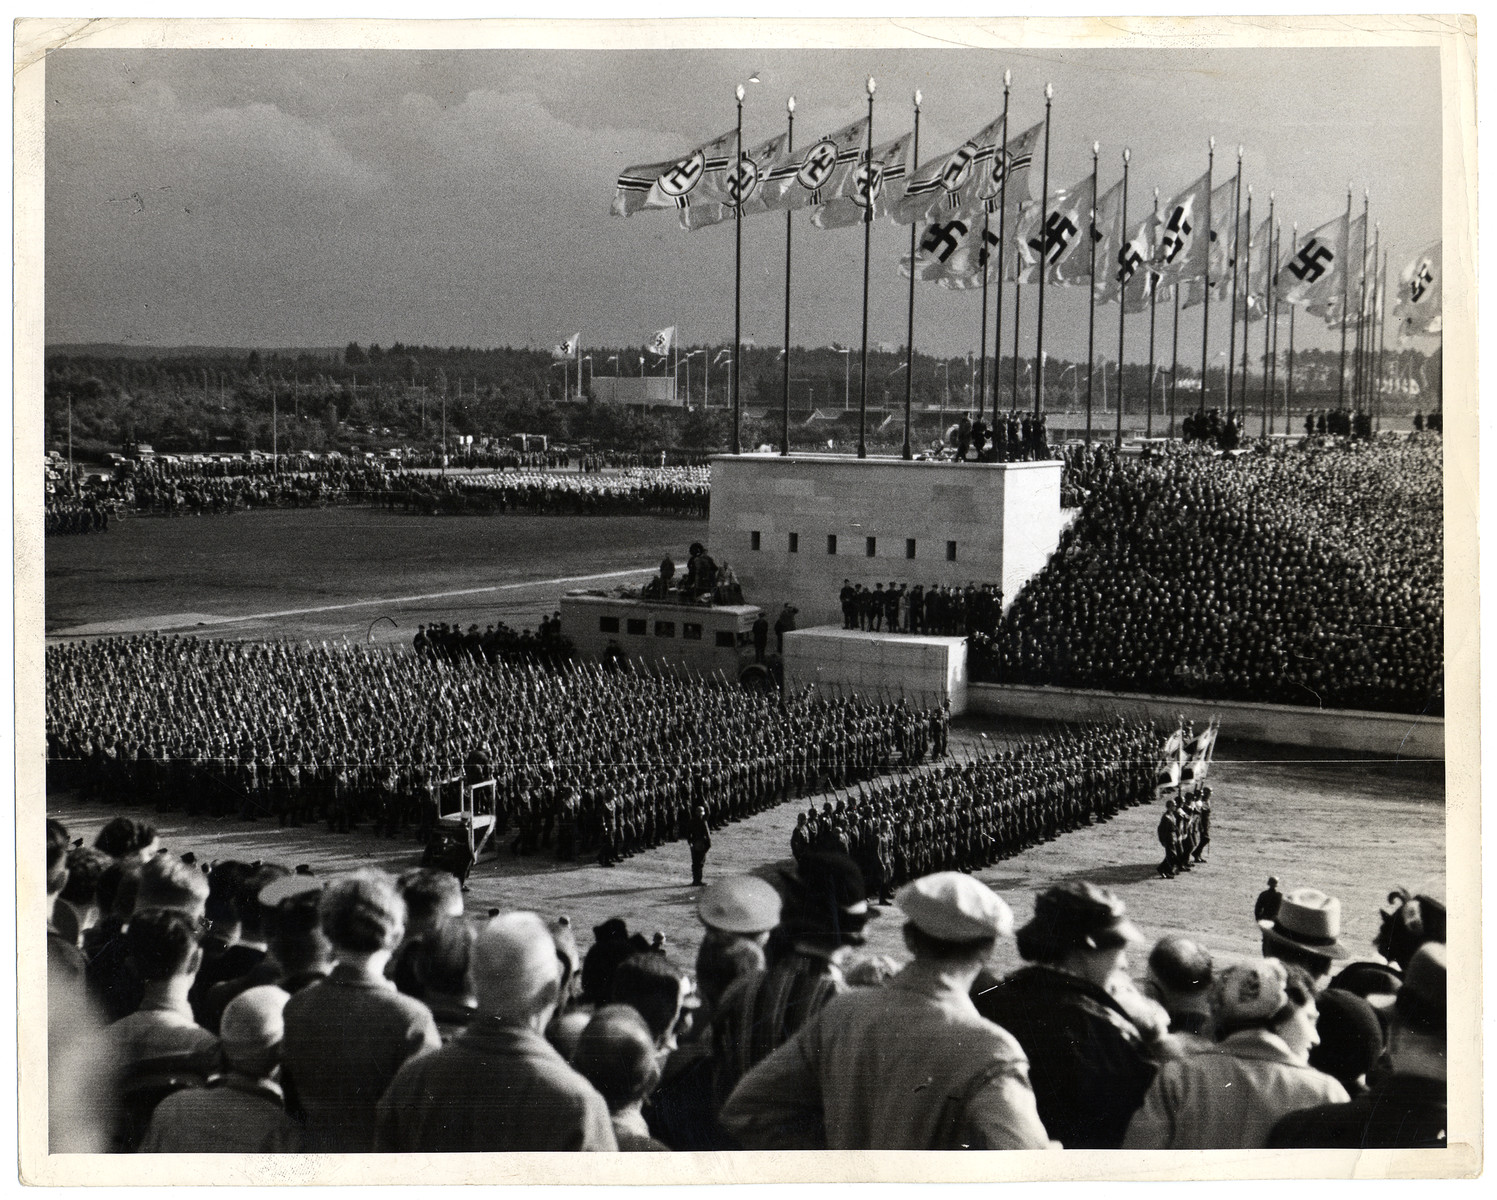 German soldiers parade in formation during war games at the Nazi Party Congress in Nuremberg.